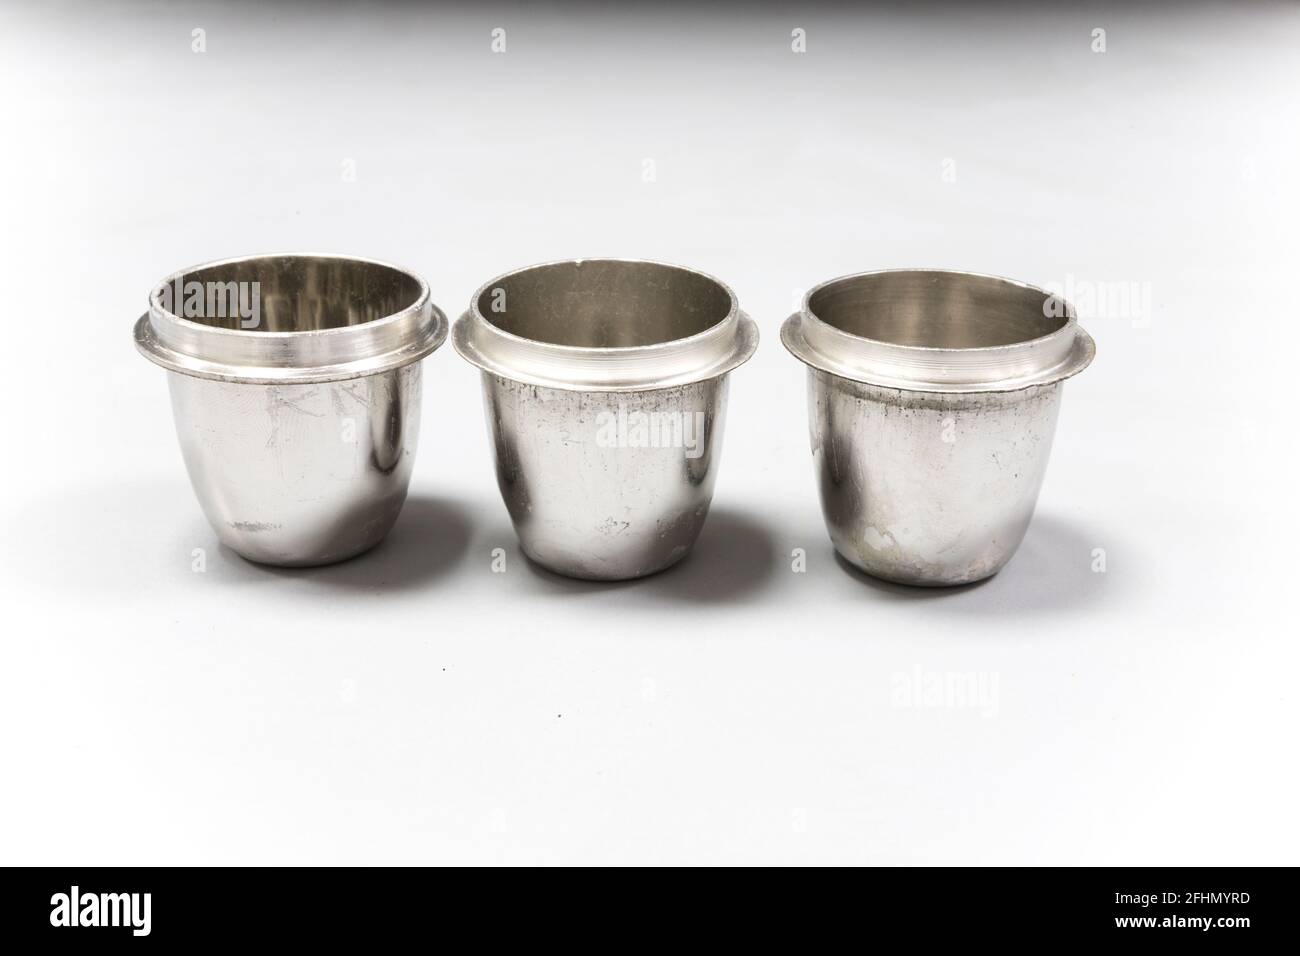 Platinum crucibles used for sample preparation in an analytical chemistry laboratory. Shiny metal lab equipment Stock Photo